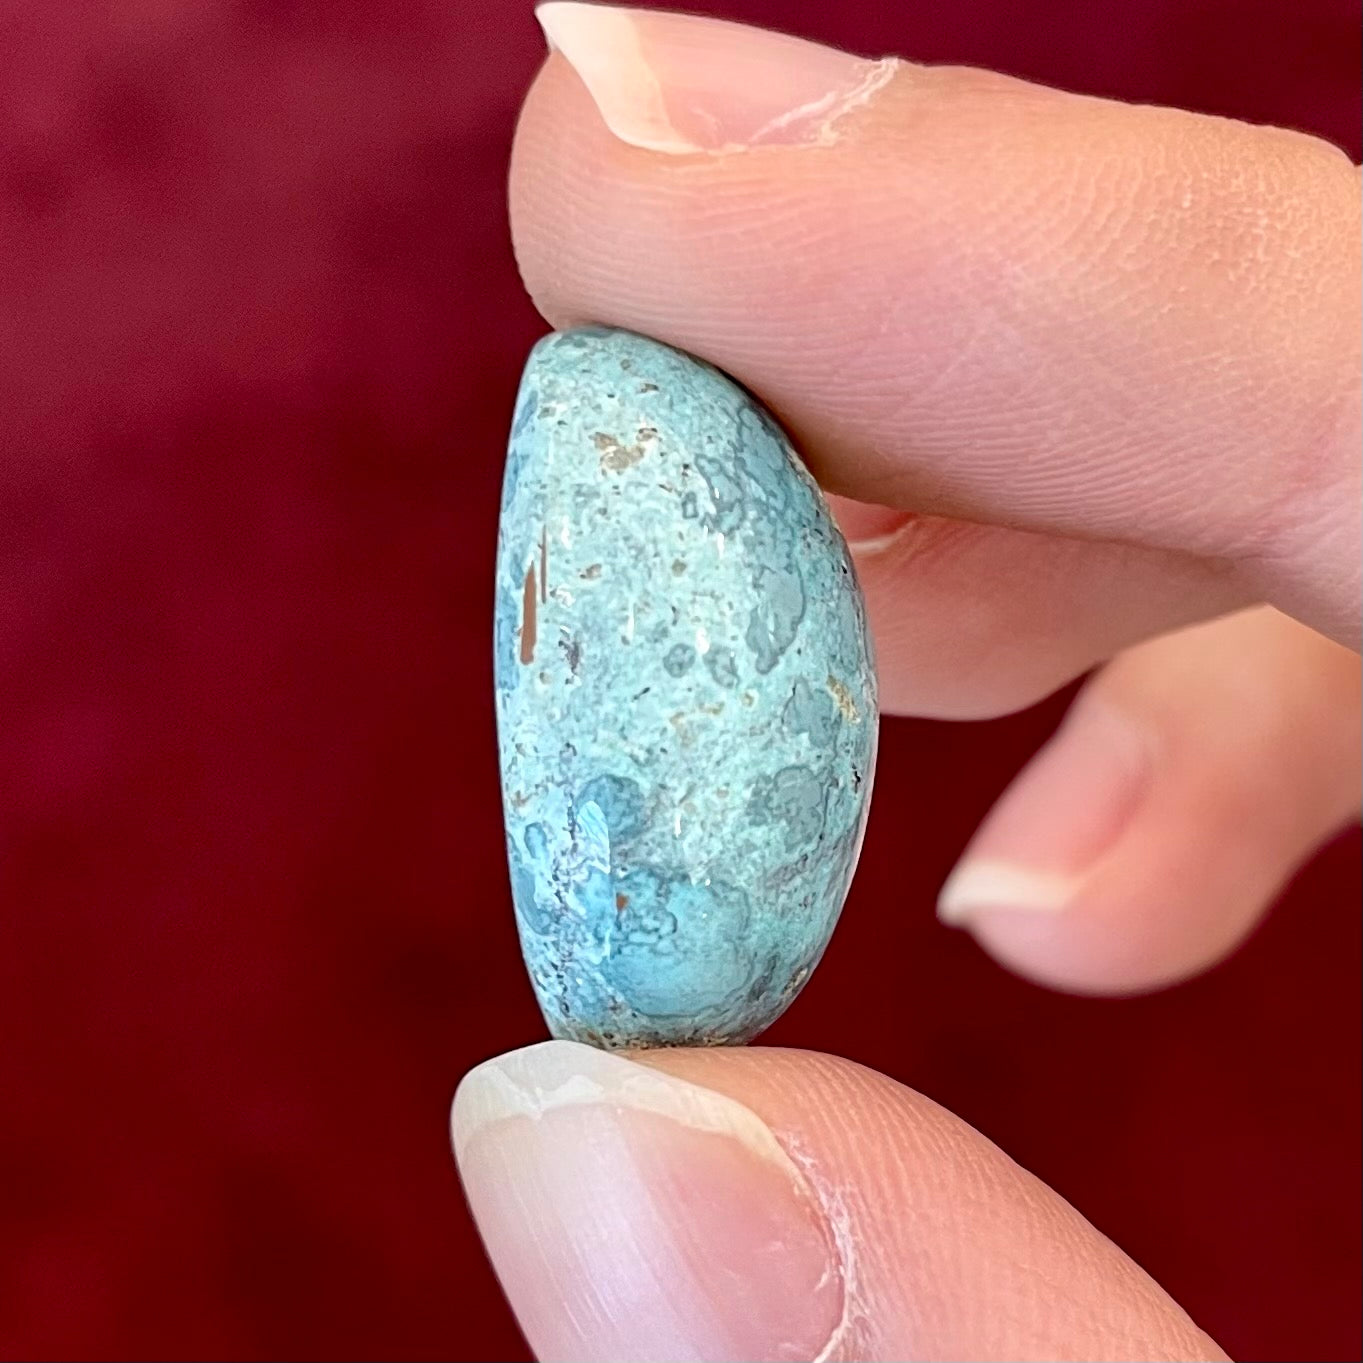 A loose, oval cabochon cut turquoise stone from Baja California.